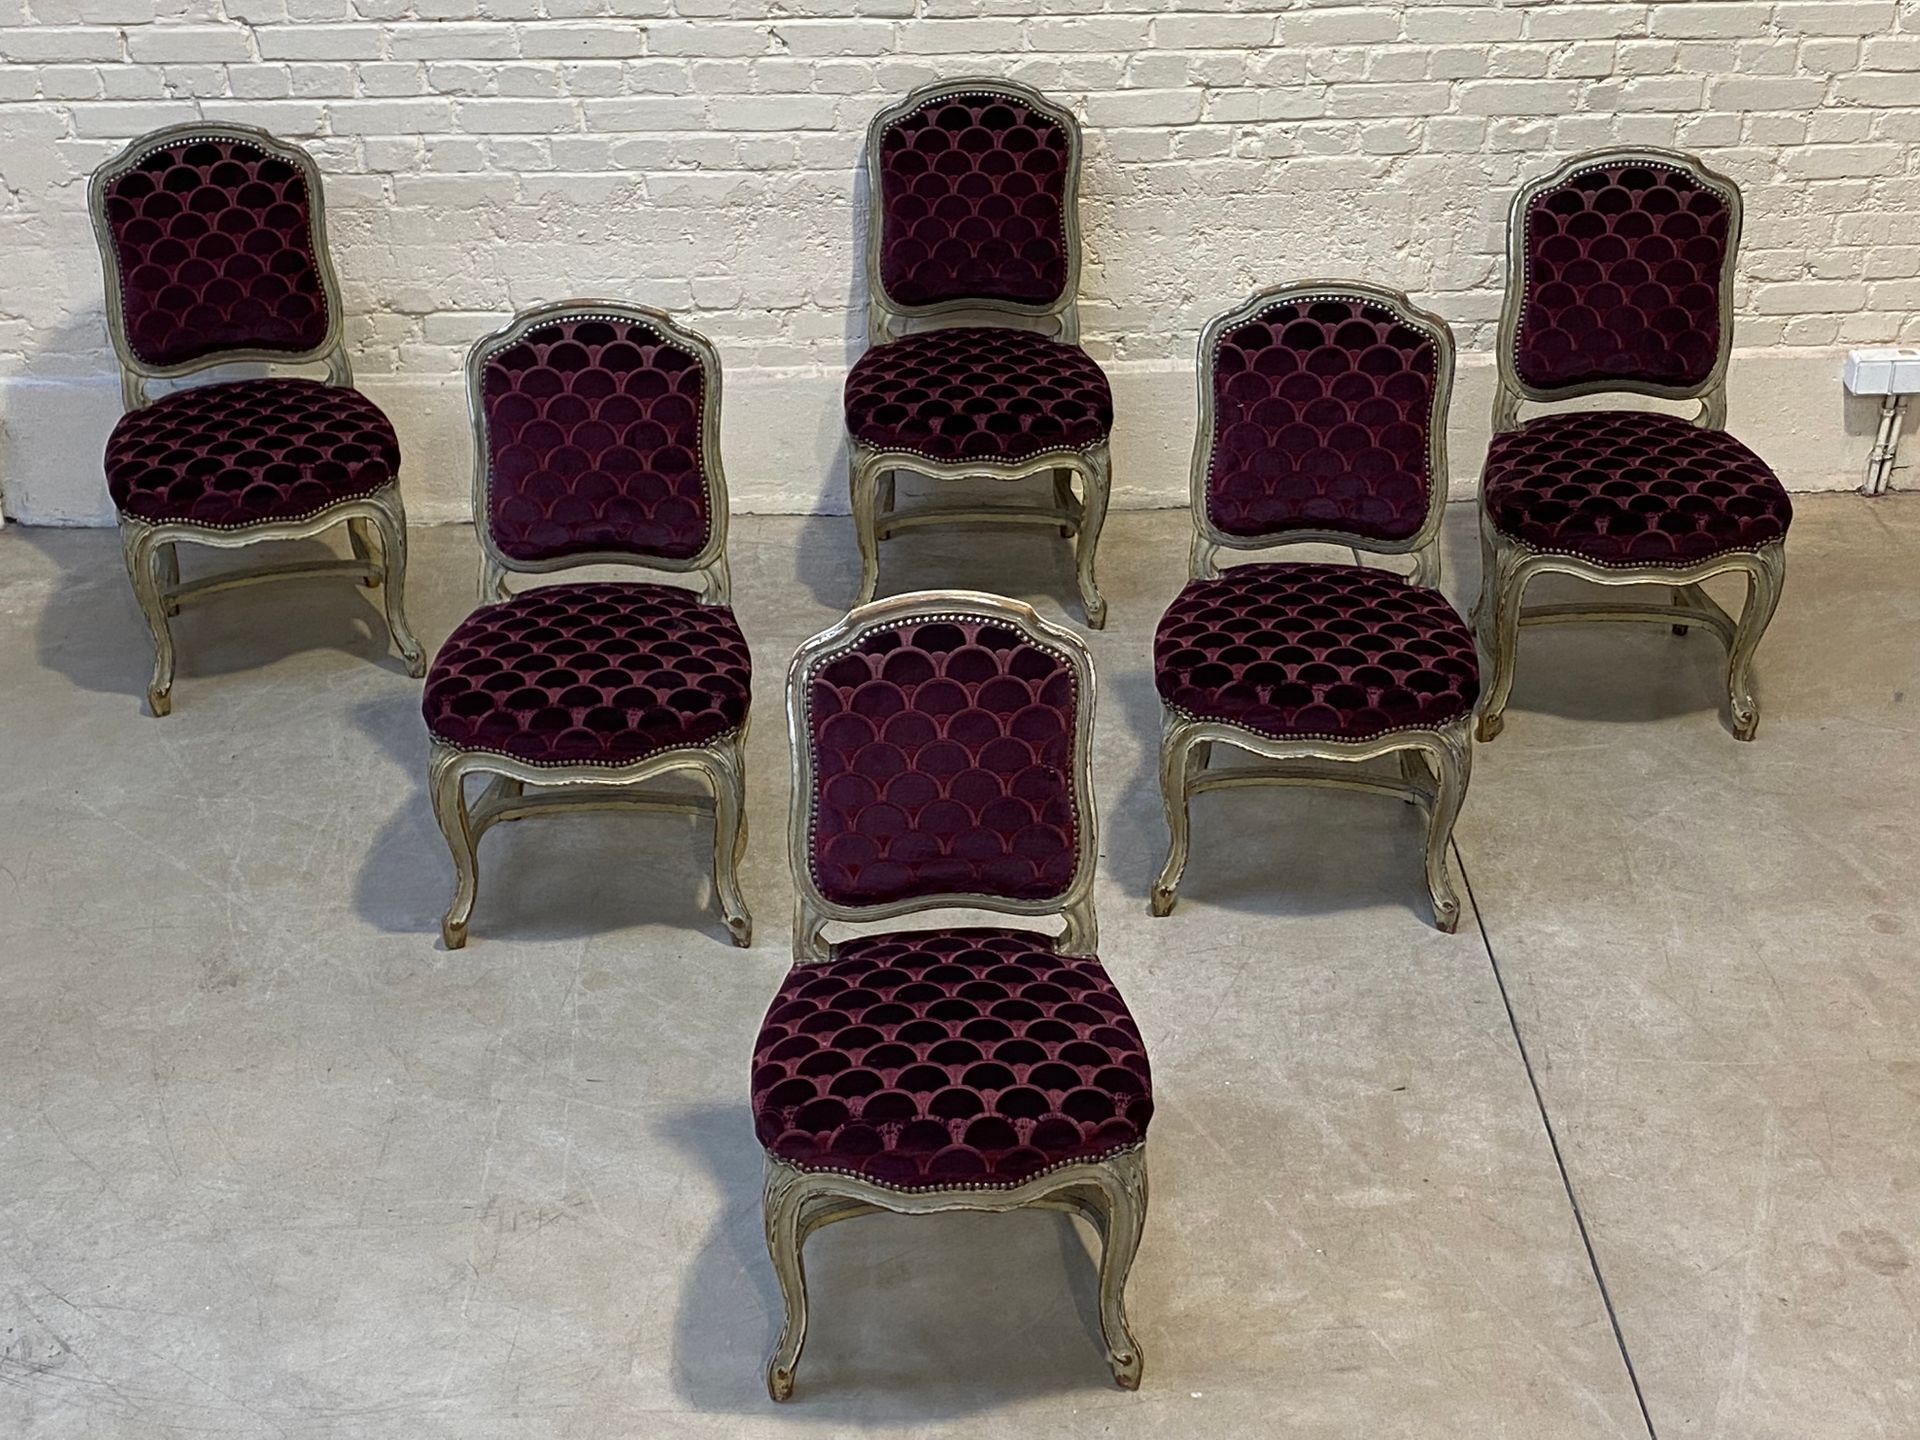 Null SUITE OF SIX CHAIRS IN MOLDED WOOD LACQUERED GRAY

Cambered legs connected &hellip;